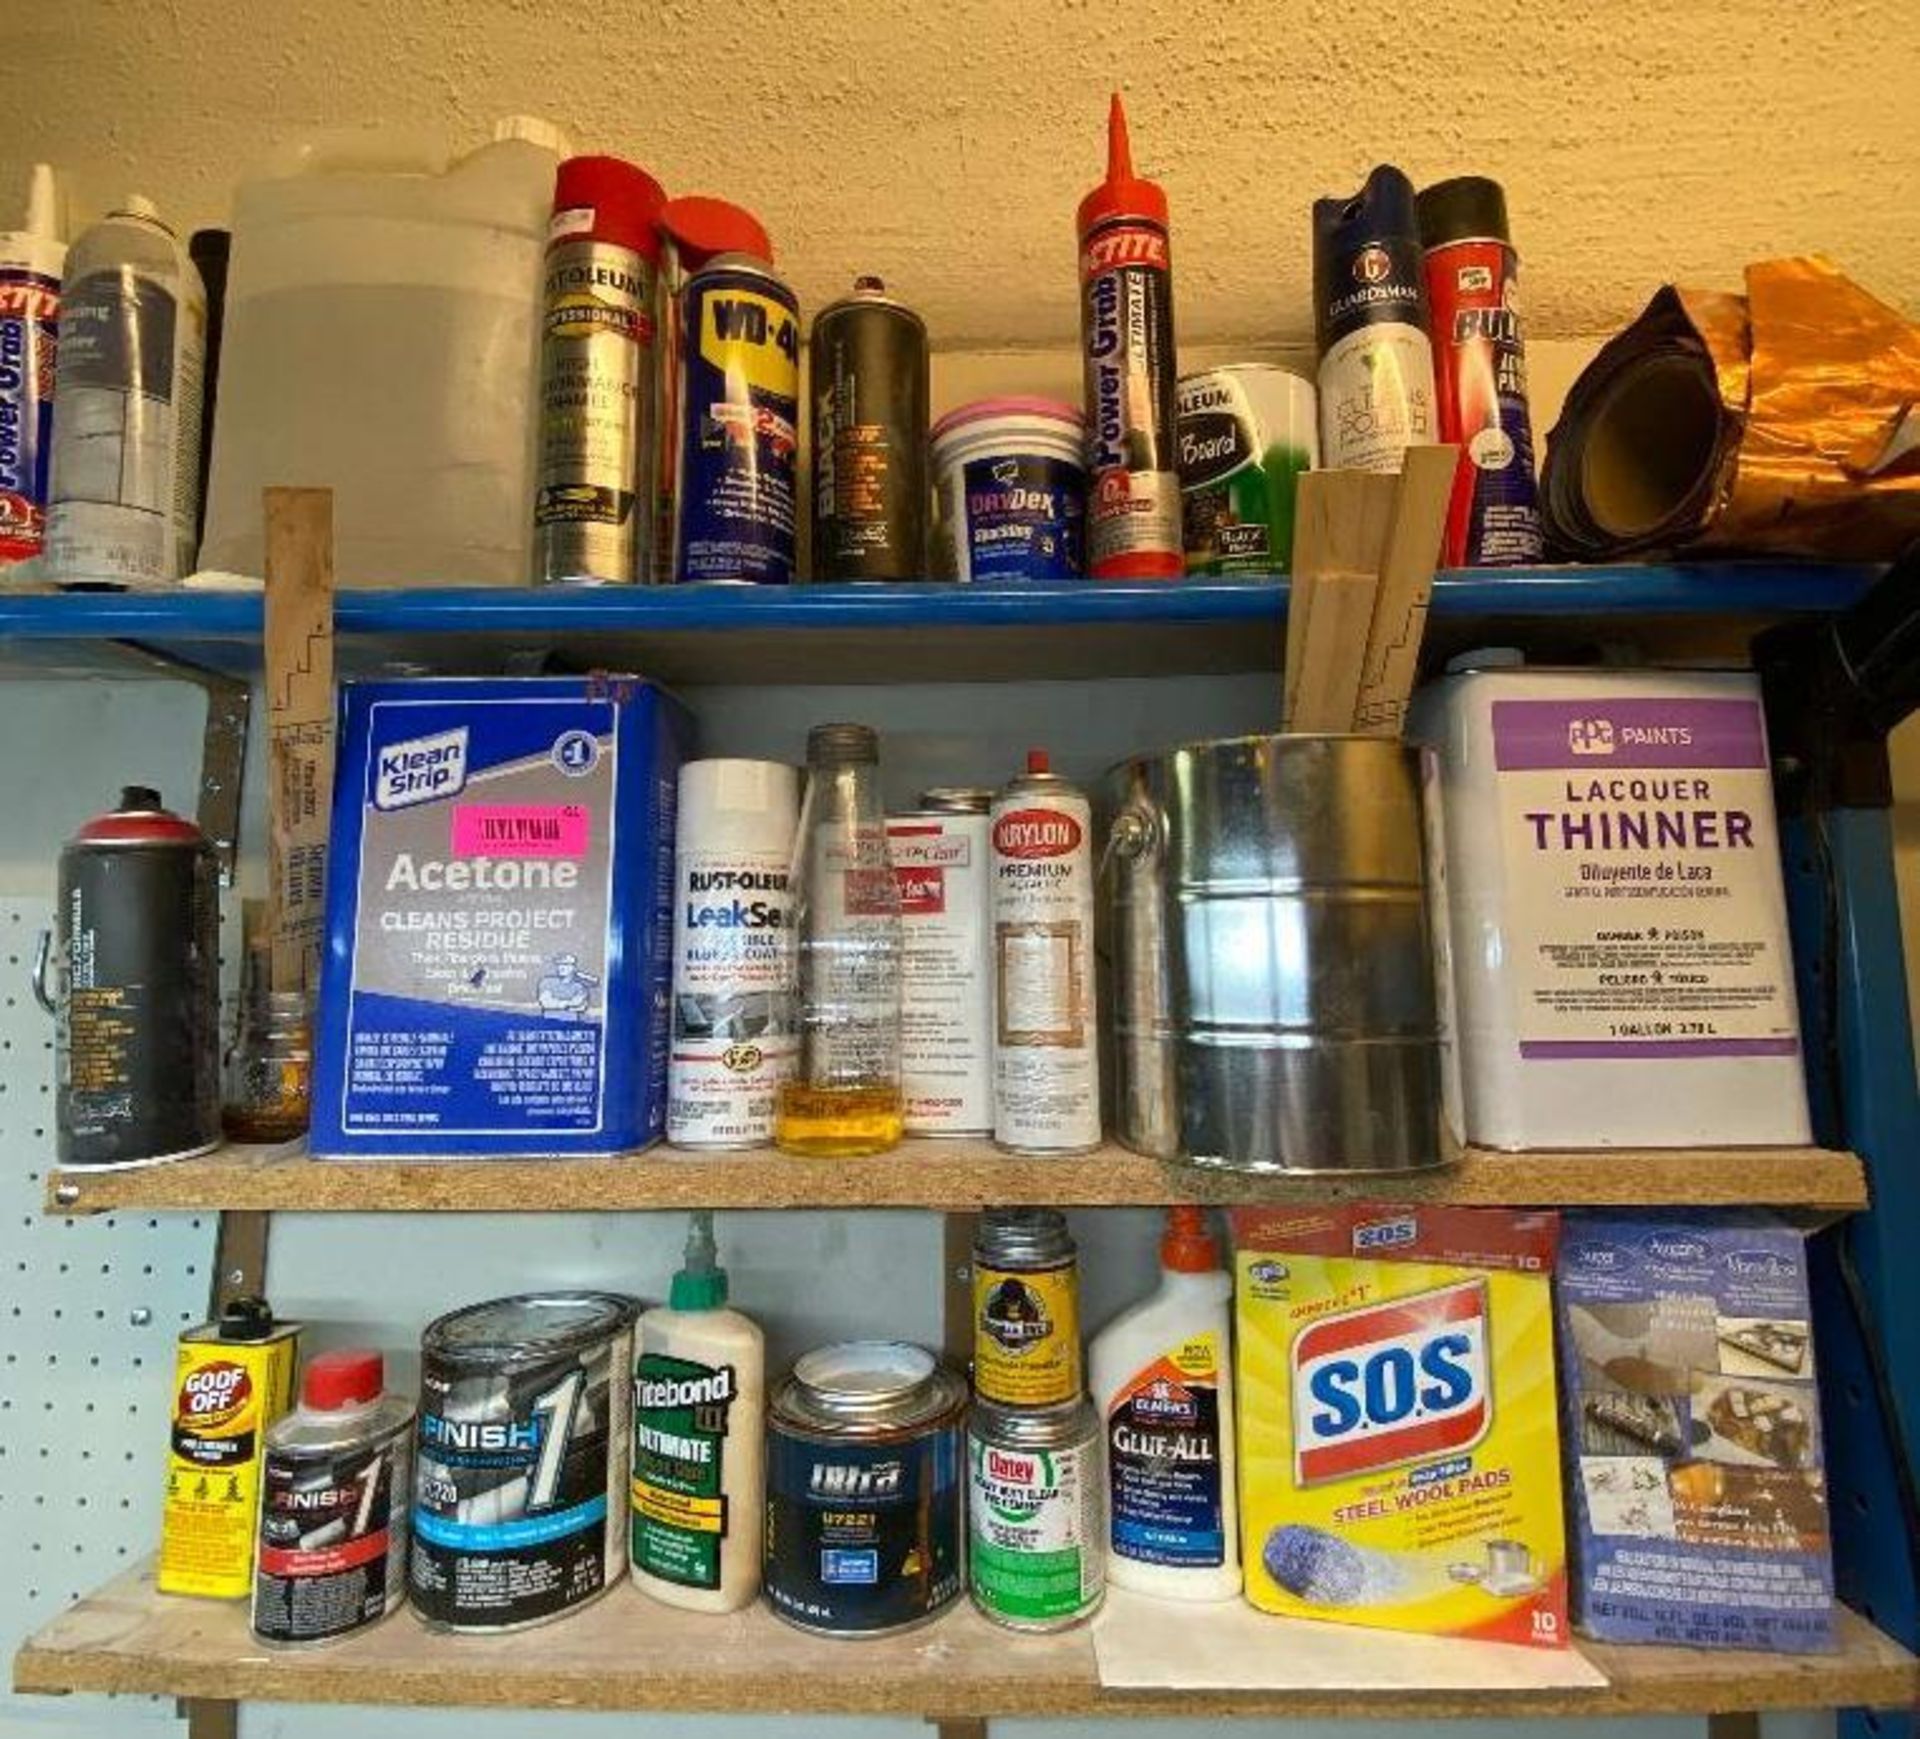 DESCRIPTION CONTENTS OF SHELVES (VARIOUS PAINTS AND CLEANERS AS SHOWN) ADDITIONAL INFORMATION SEE AD